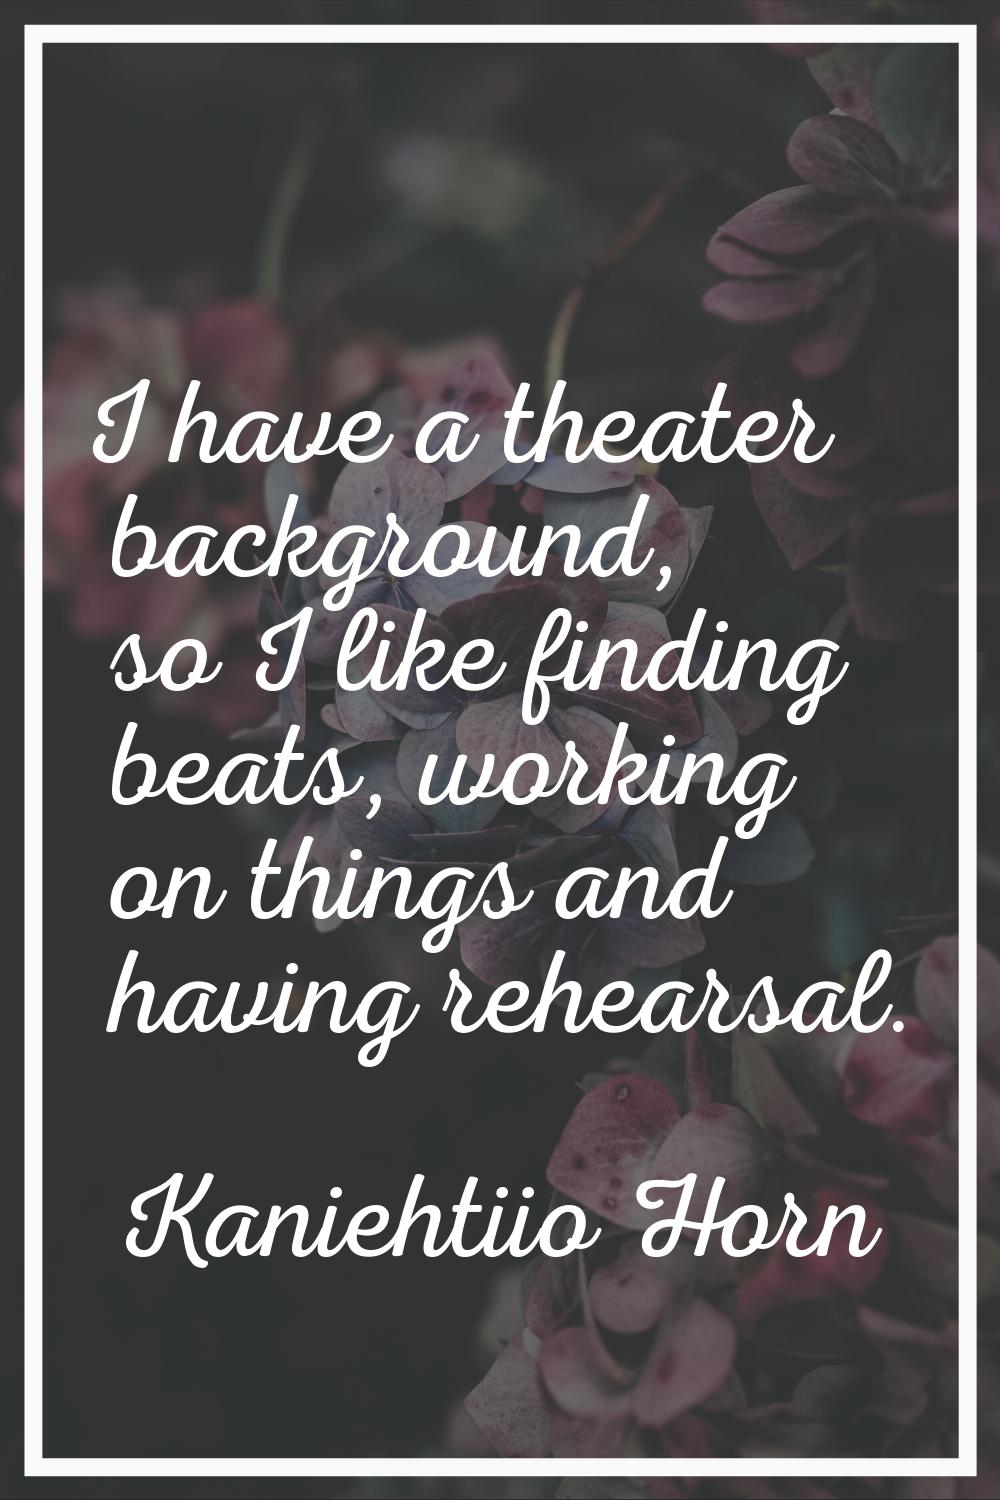 I have a theater background, so I like finding beats, working on things and having rehearsal.